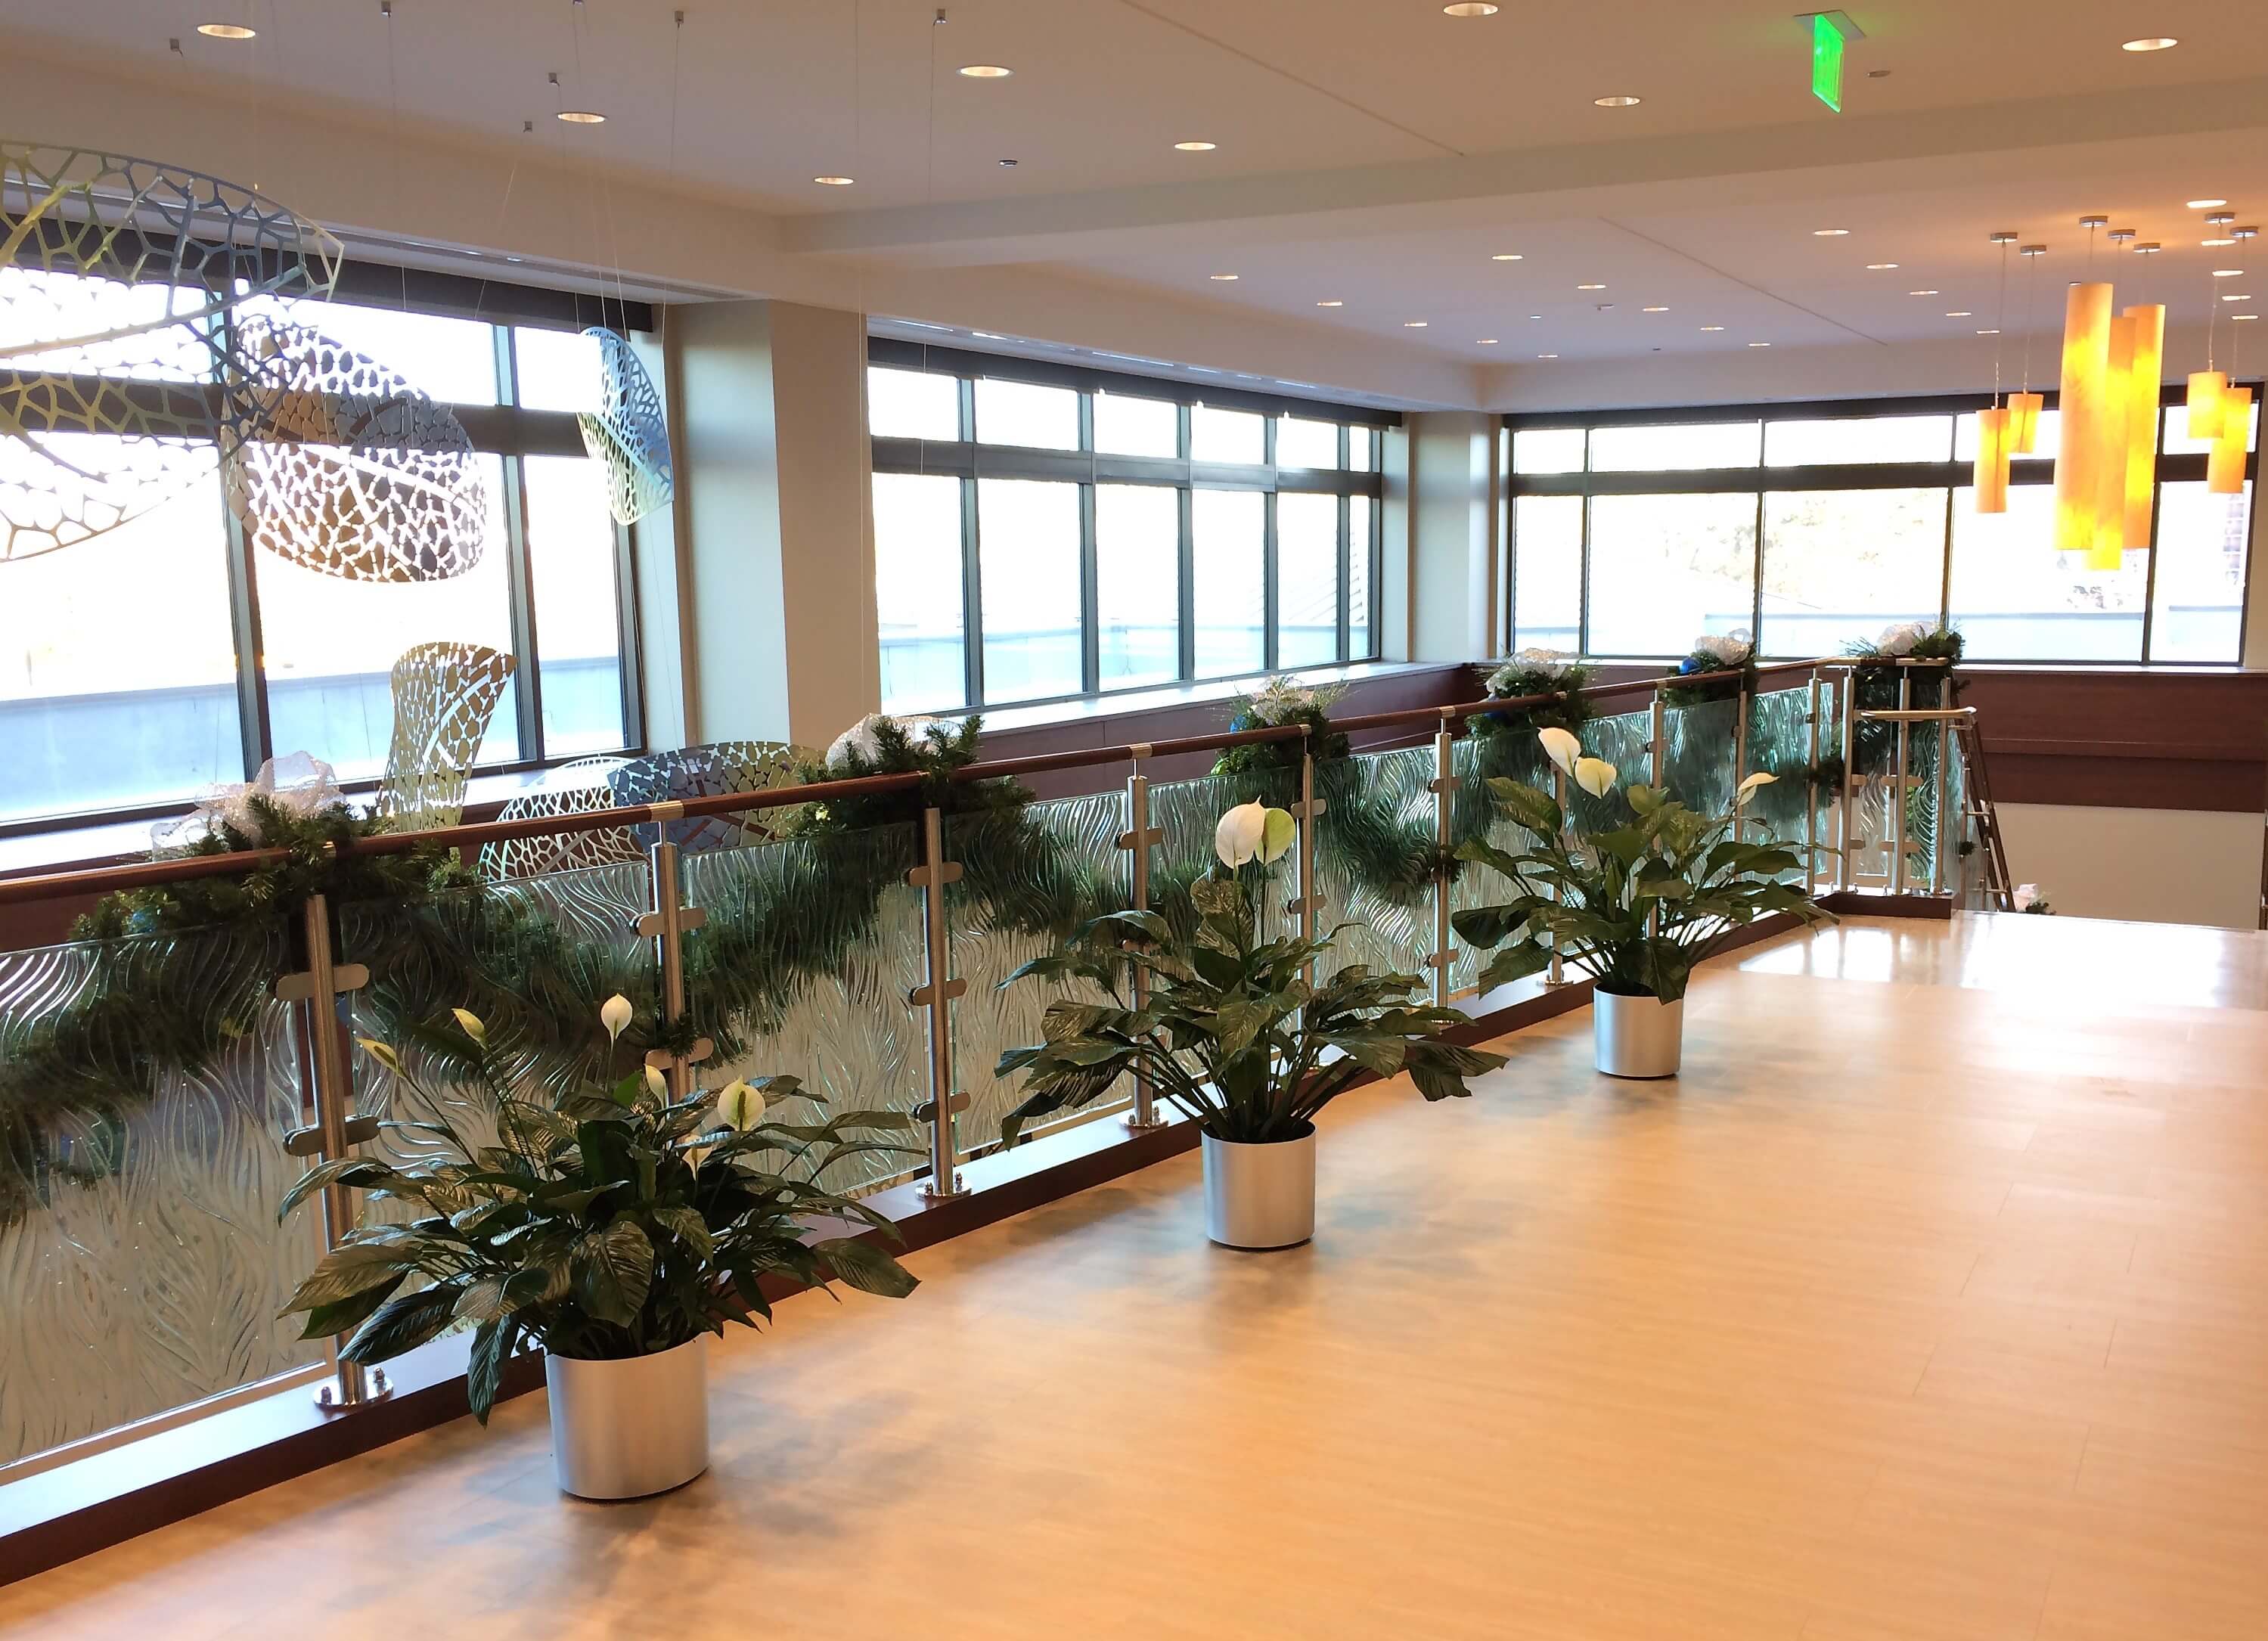 Circum handrail with cast patterned glass infill installation at the Adventist Cancer Ctr, IL.